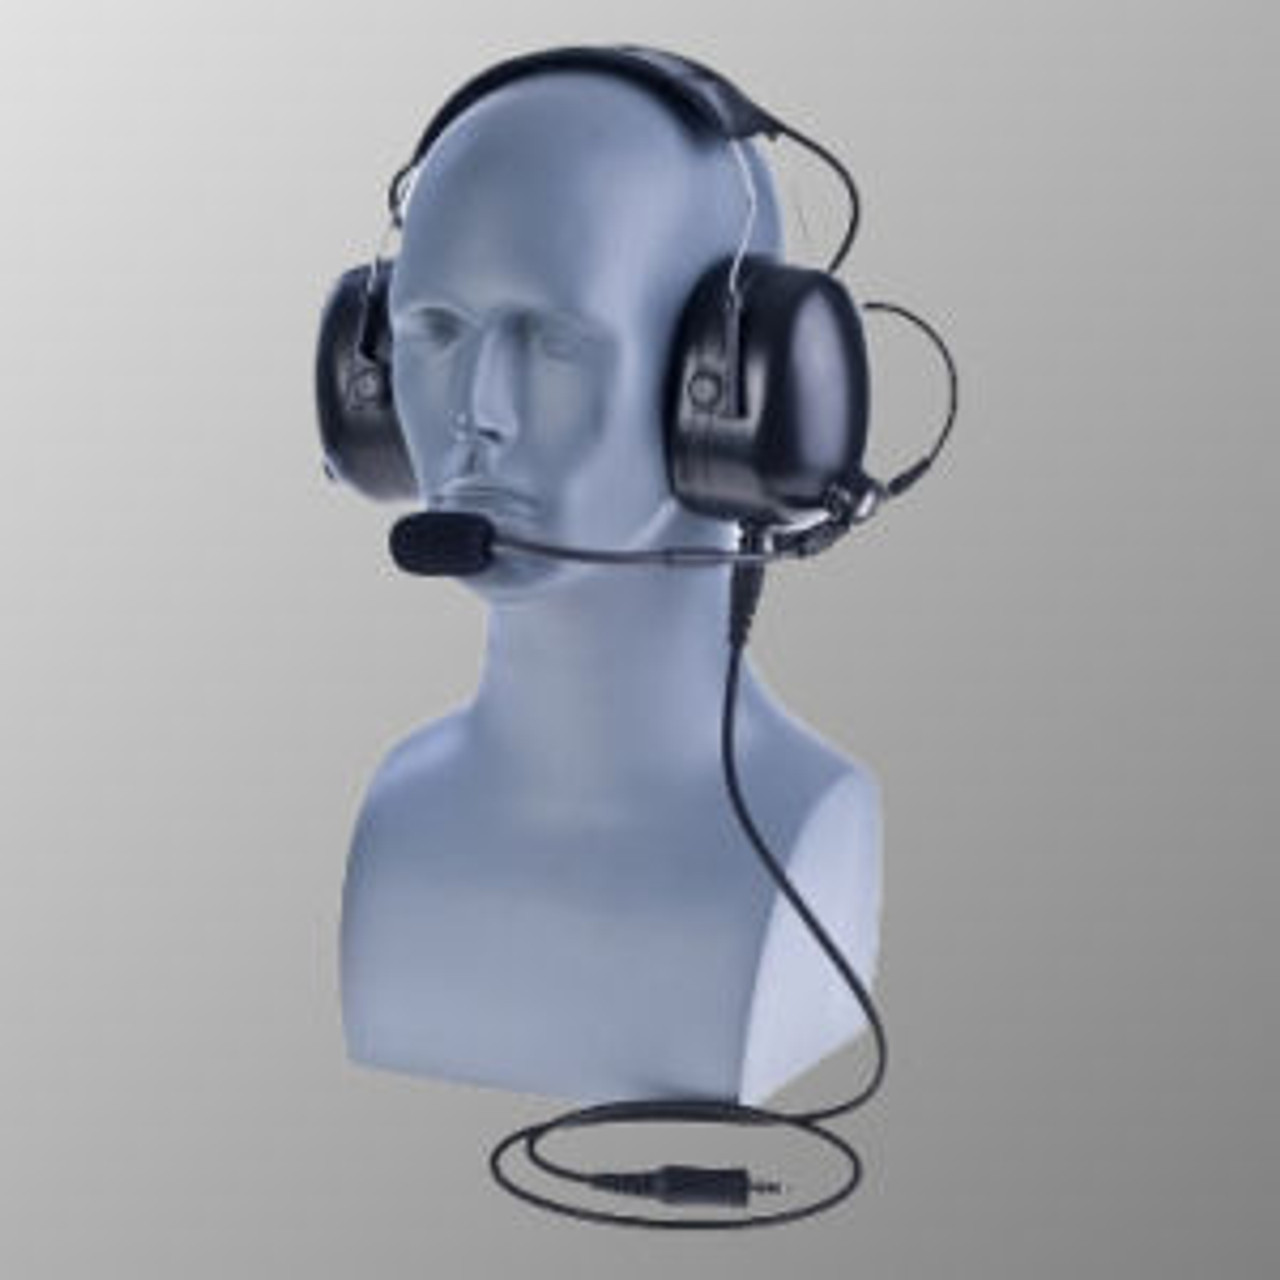 M/A-Com P7230 Over The Head Double Muff Headset